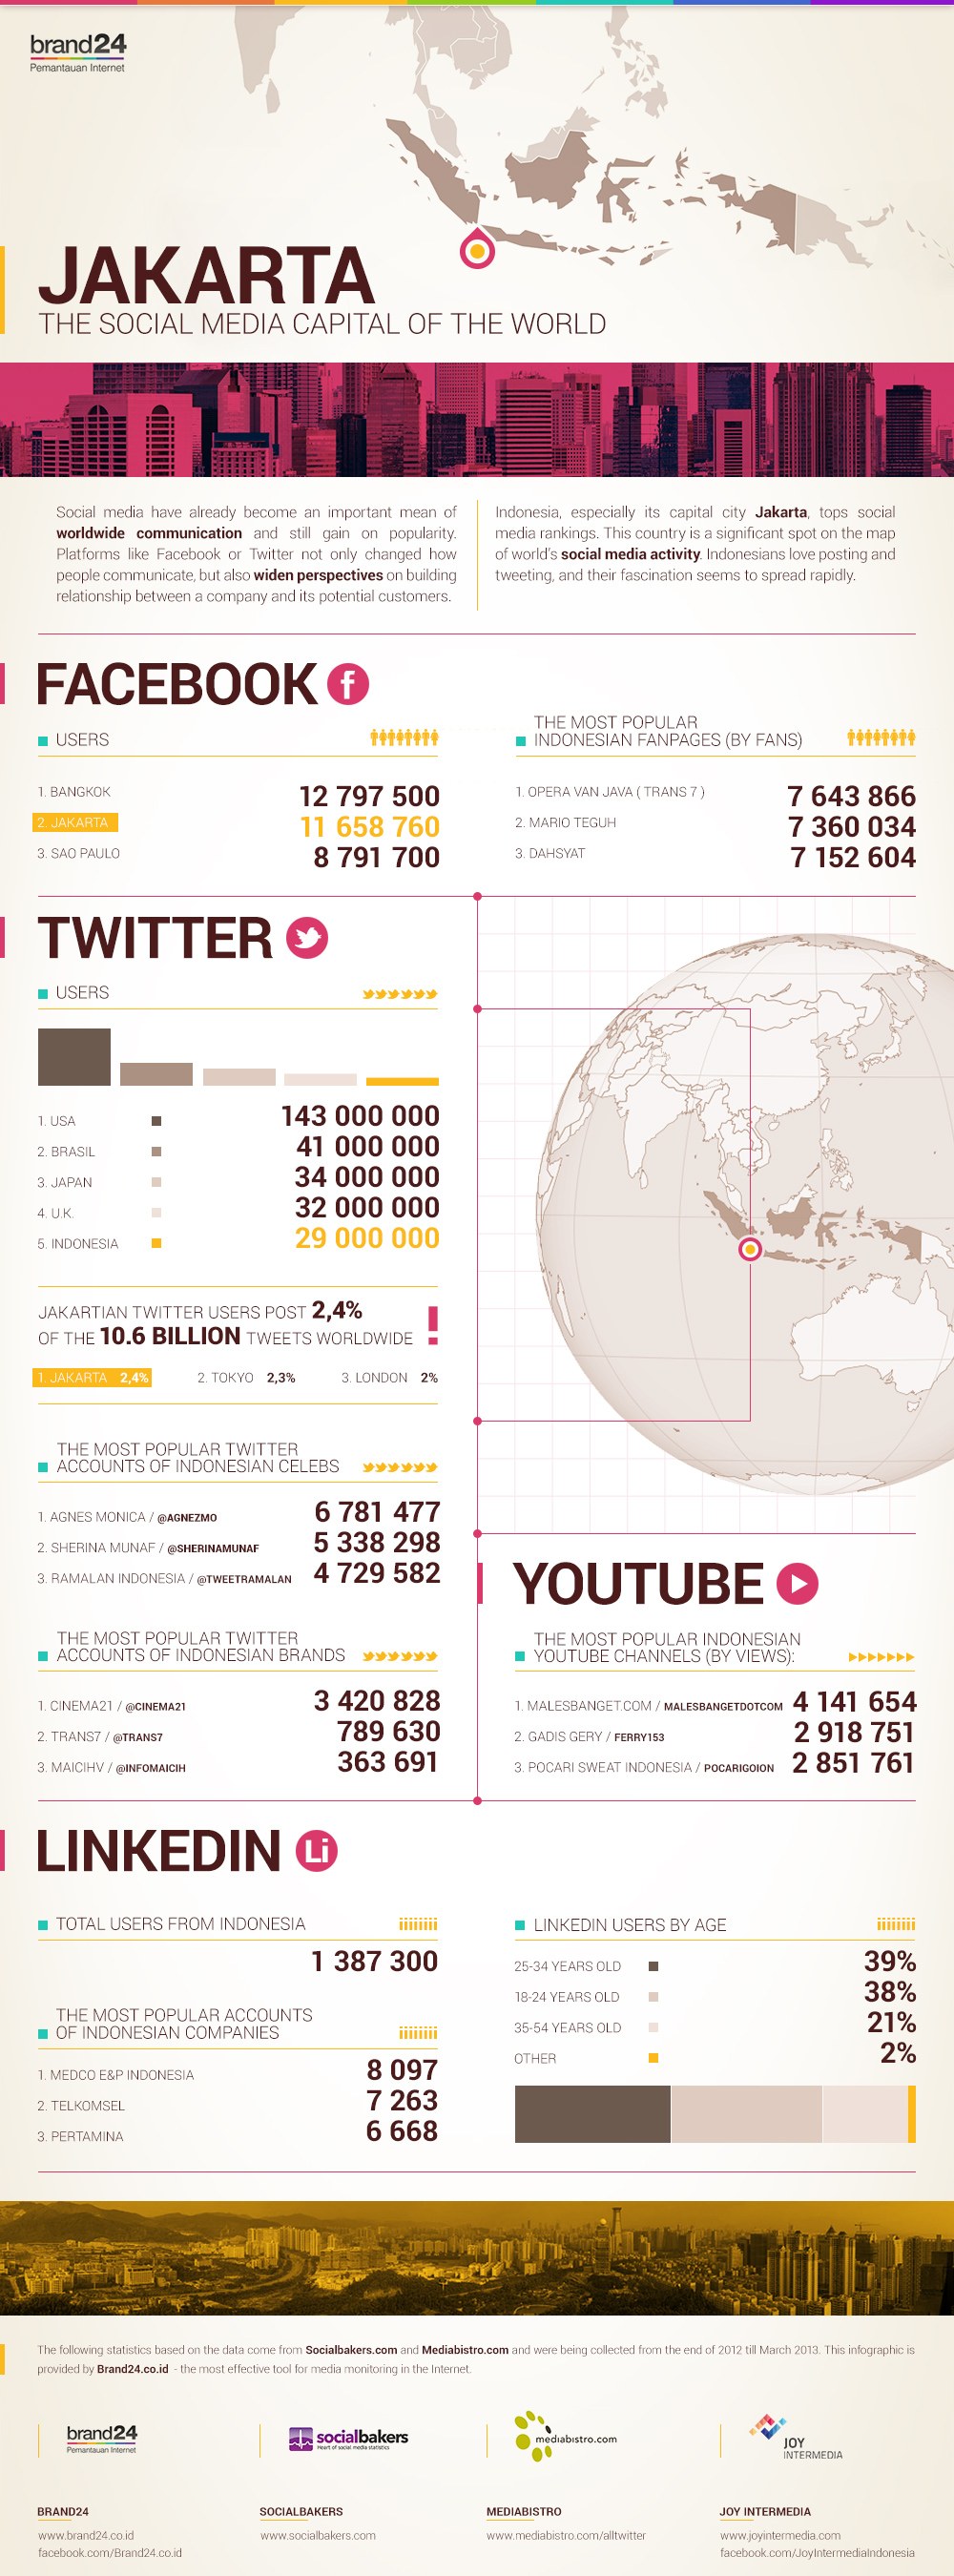 Indonesia is Social: 2.4% of World's Twitter Posts Come From Jakarta